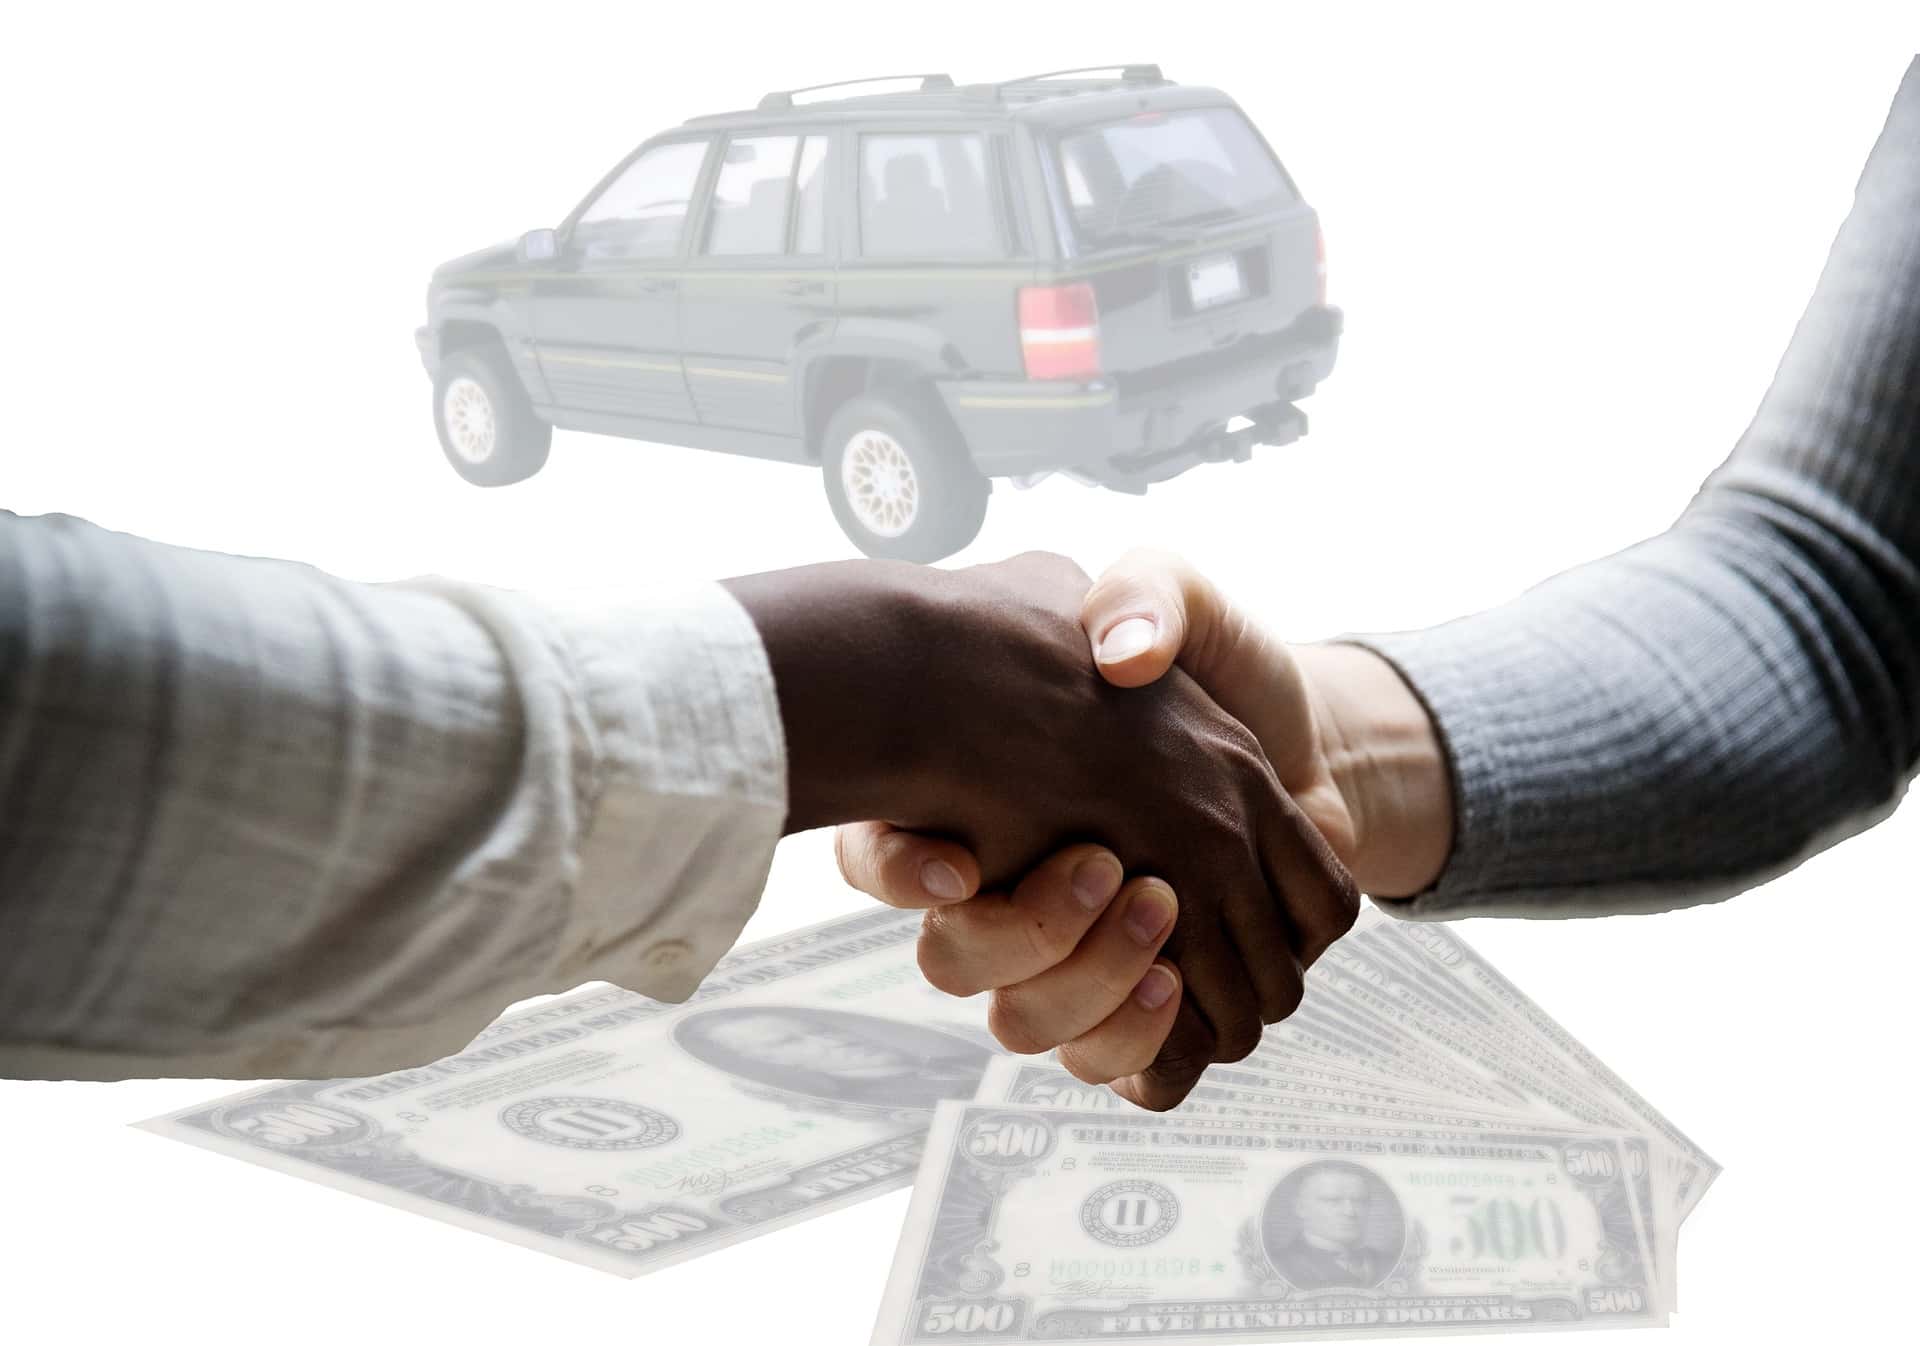 4 Situations That Will Require a Vehicle Title Transfer